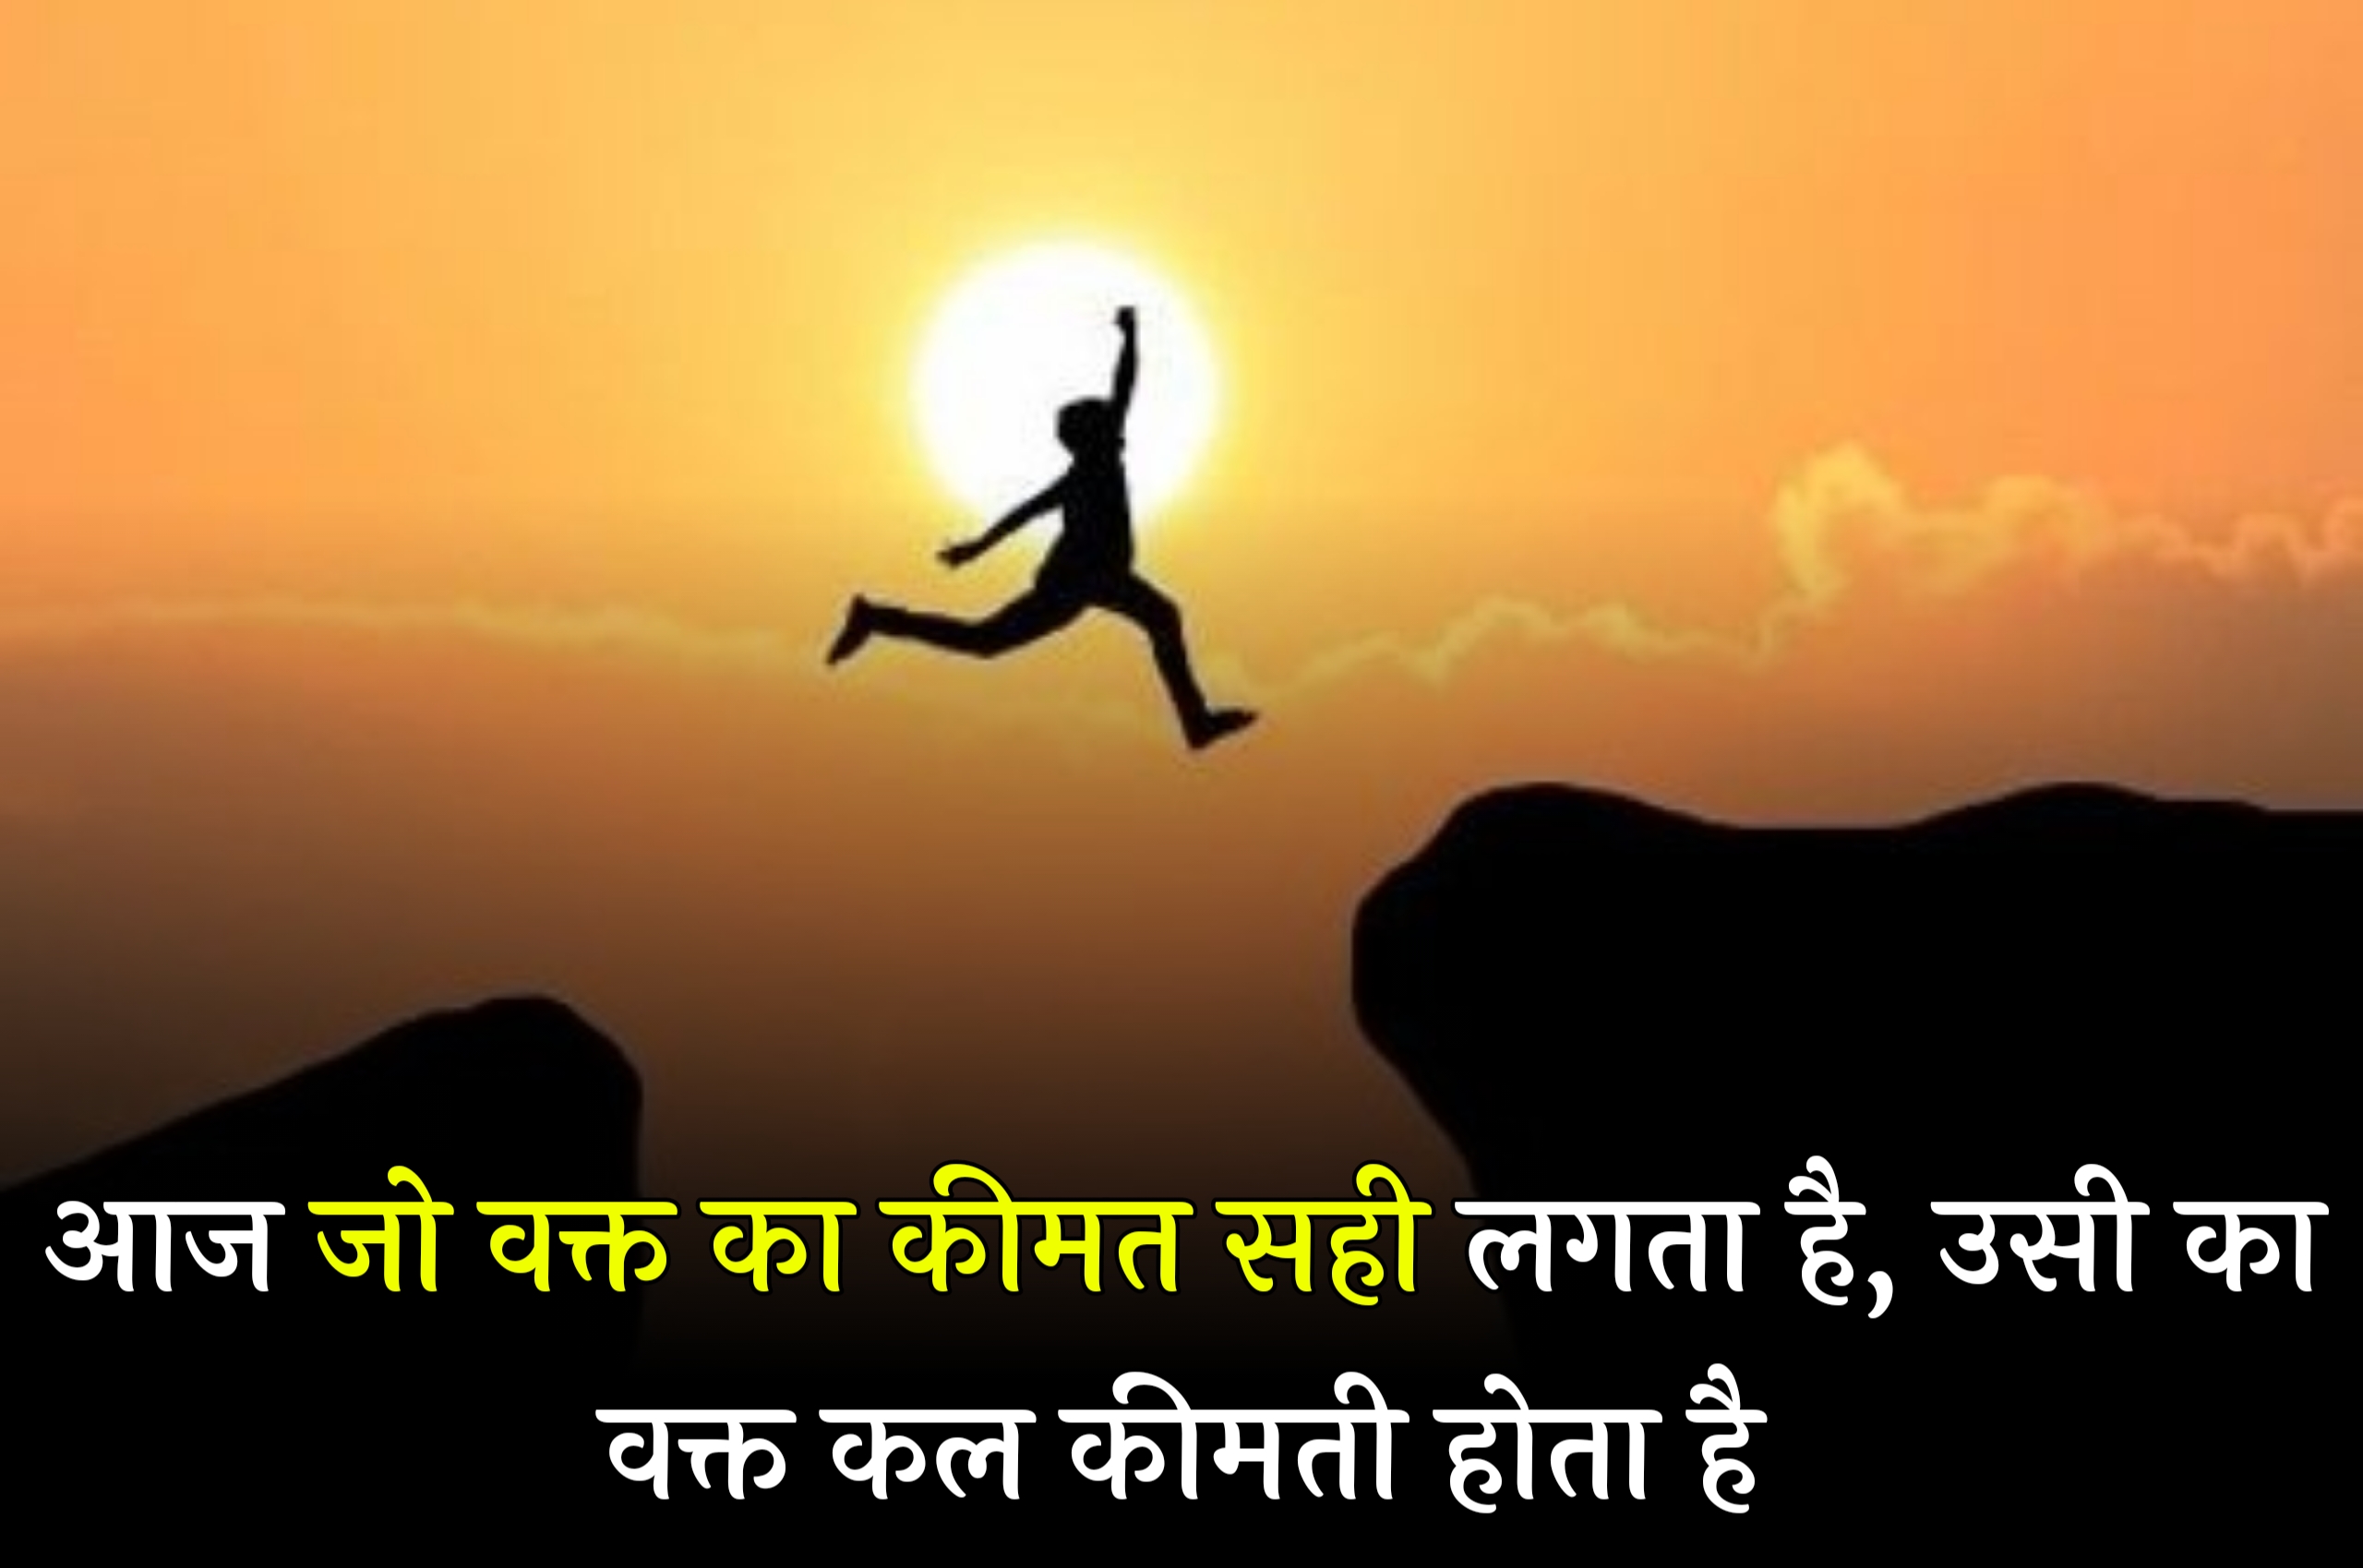 200 + Thought of the day in Hindi | थॉट ऑफ़ द डे इन हिंदी 2023,thought of the day in hindi and english,motivational thought of the day in hindi,thought of the day in hindi to english,thought of the day in hindi for students,thought of the day in hindi life,education thought of the day in hindi,thought of the day in hindi with meaning,best thought of the day in hindi,today thought of the day in hindi